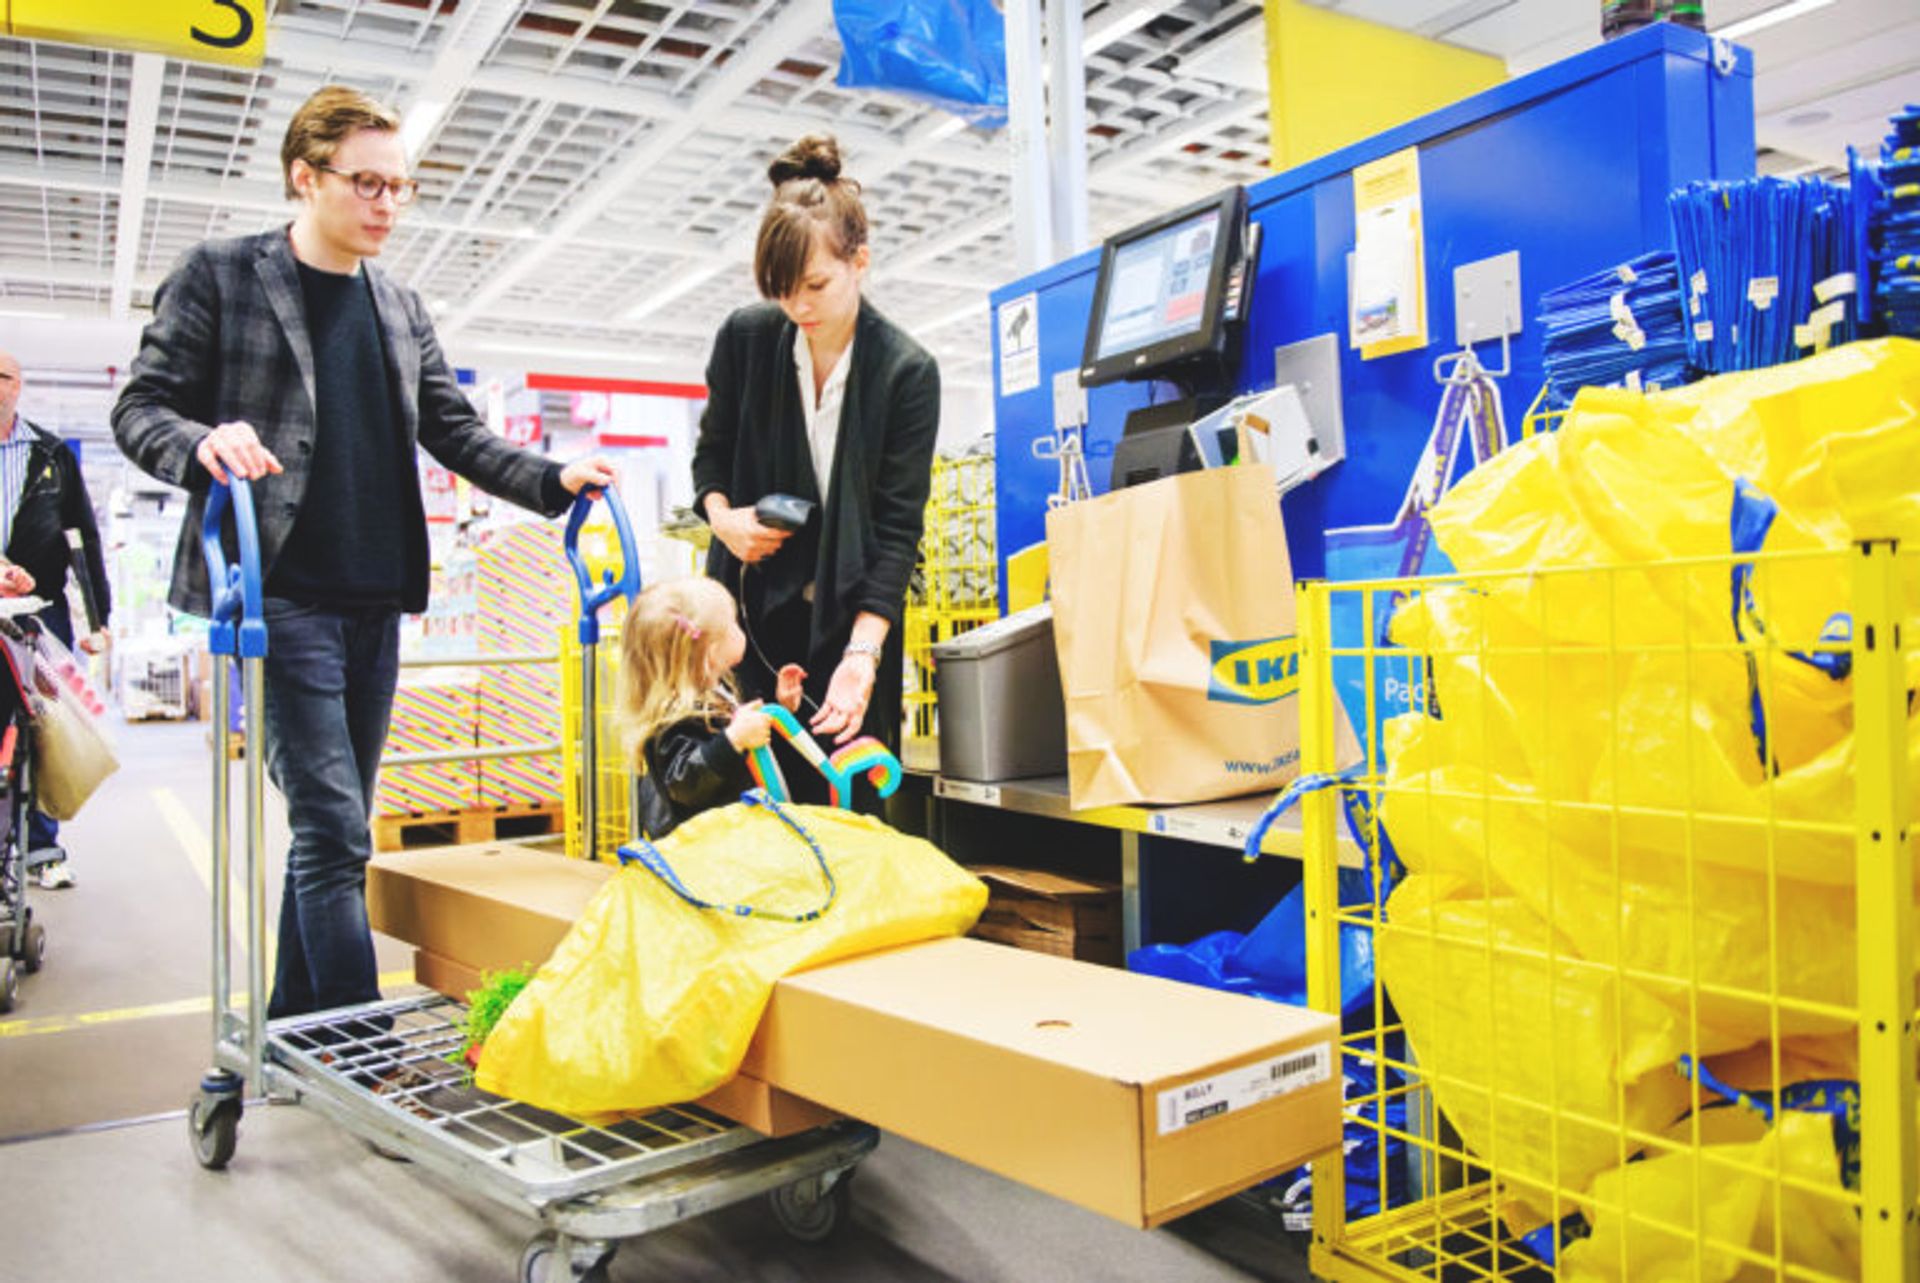 A family at the self check-out at IKEA, scanning all their items. The child is sittning upon the shopping chart, the mum is scanning and the dad is behind the chart.  